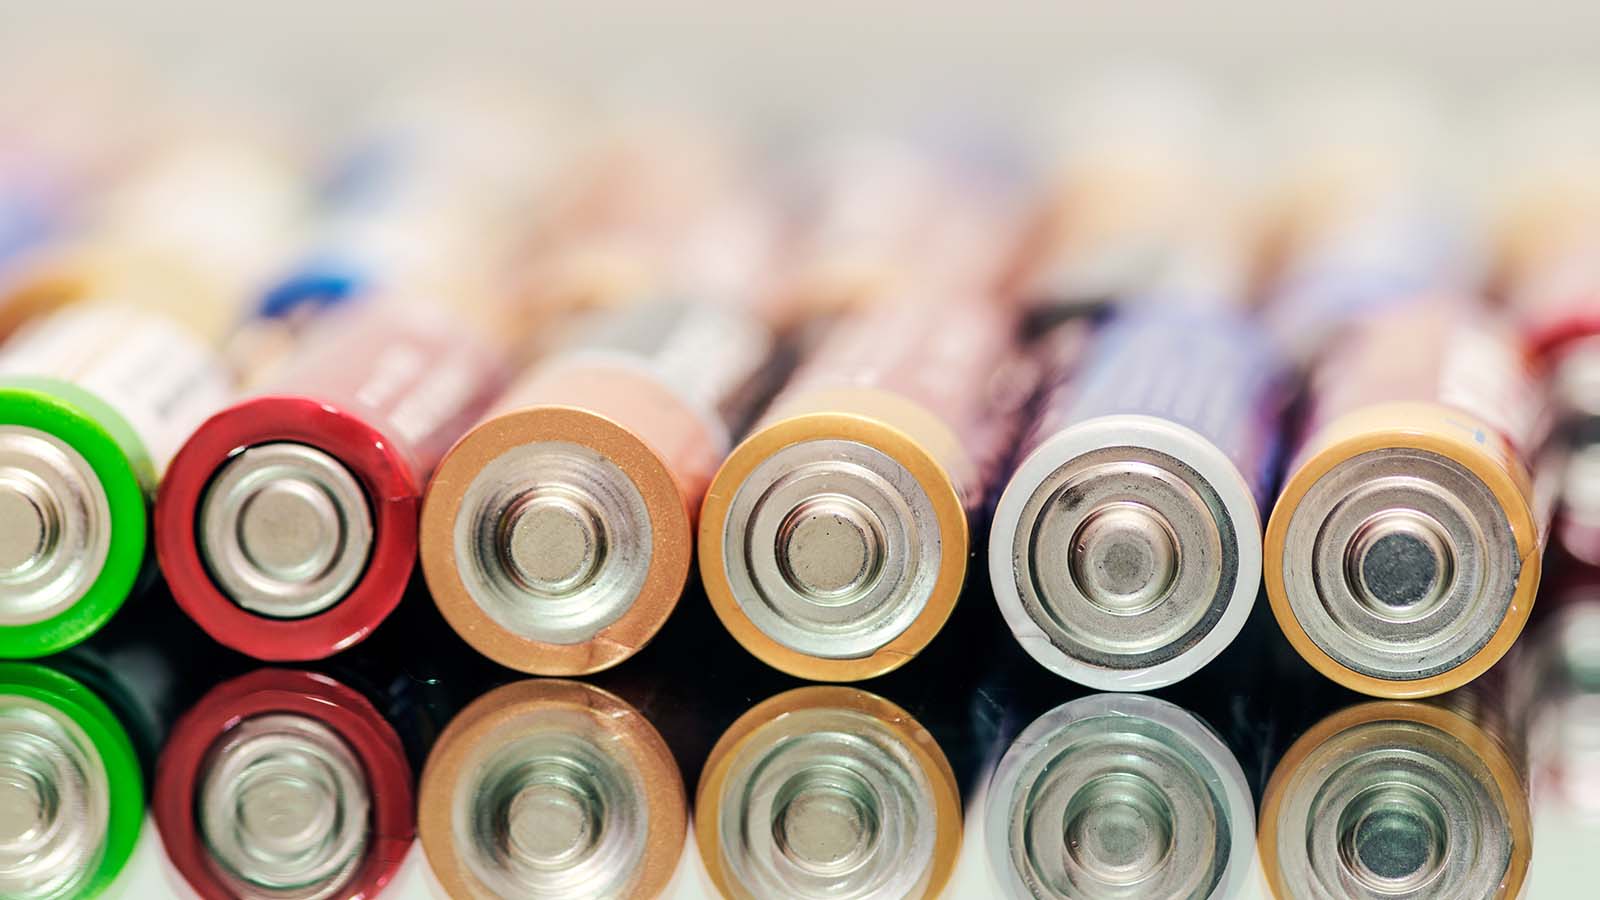 Stock Market Crash Warning: Don't Get Caught Holding These 3 Battery Stocks.